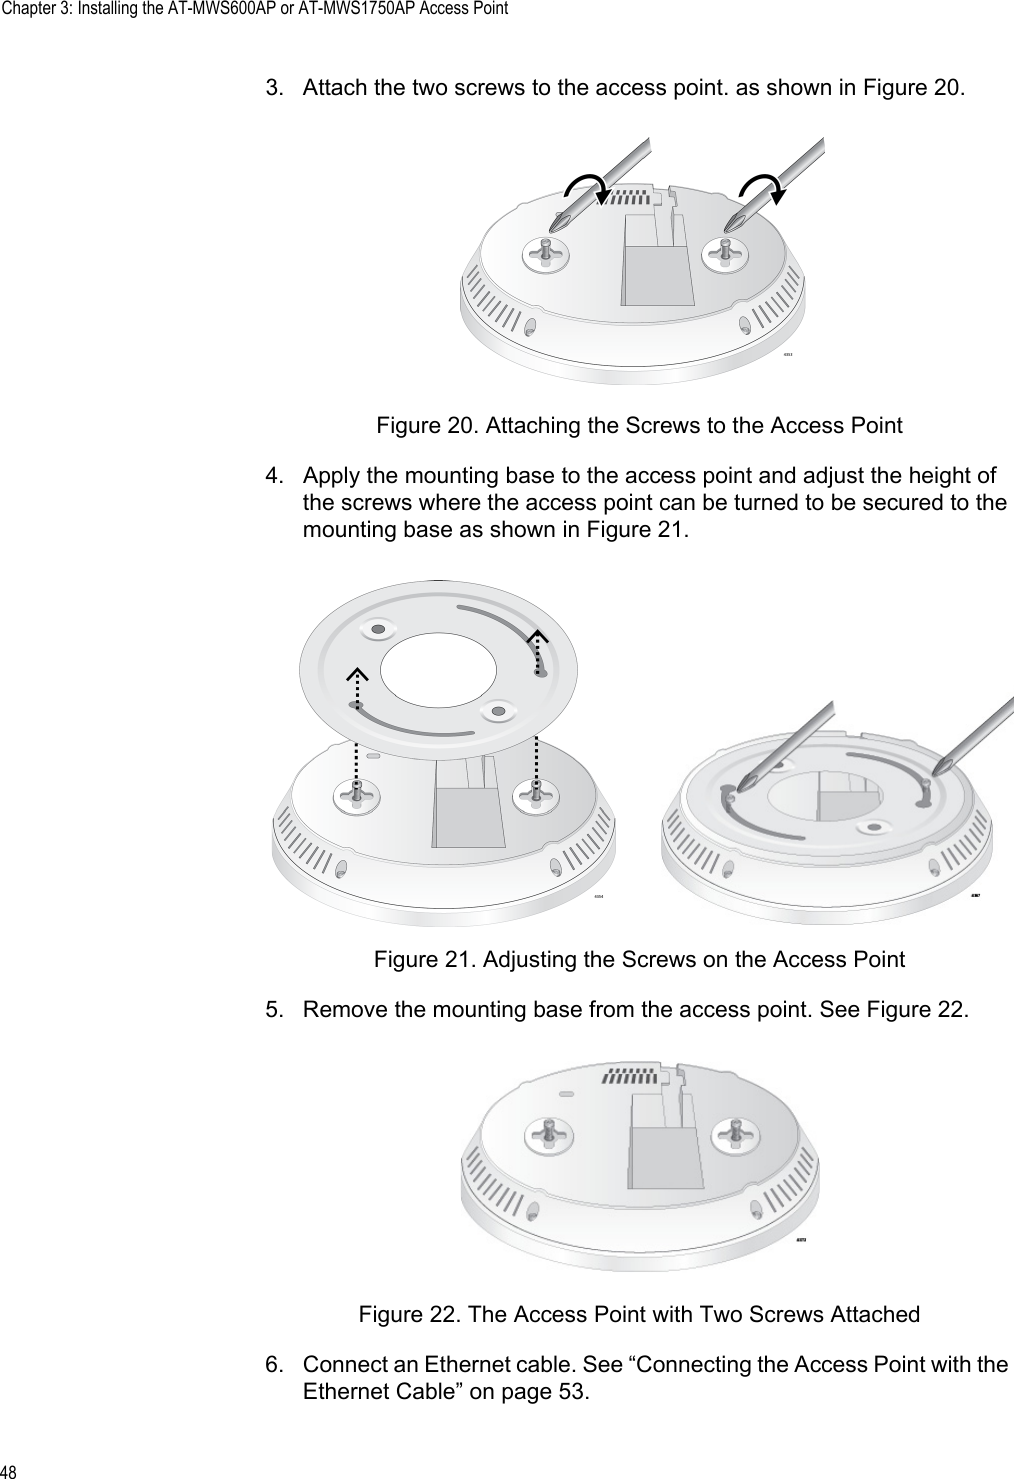 Chapter 3: Installing the AT-MWS600AP or AT-MWS1750AP Access Point483. Attach the two screws to the access point. as shown in Figure 20.Figure 20. Attaching the Screws to the Access Point4. Apply the mounting base to the access point and adjust the height of the screws where the access point can be turned to be secured to the mounting base as shown in Figure 21.Figure 21. Adjusting the Screws on the Access Point5. Remove the mounting base from the access point. See Figure 22.Figure 22. The Access Point with Two Screws Attached6. Connect an Ethernet cable. See “Connecting the Access Point with the Ethernet Cable” on page 53.